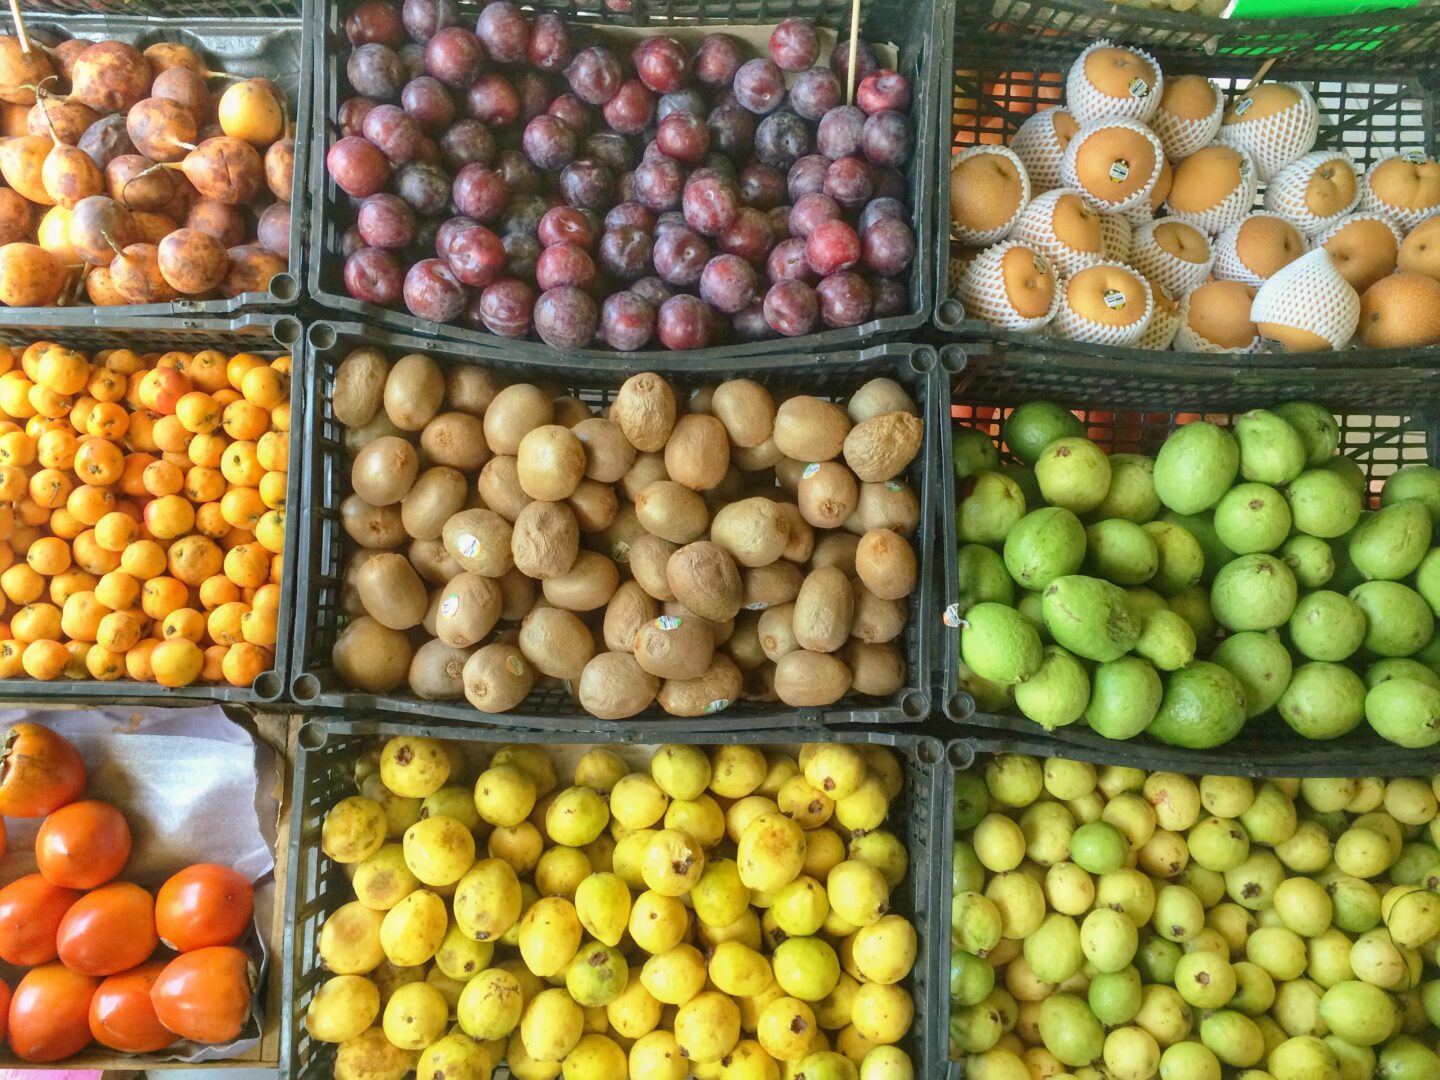 A variety of fruit in baskets.